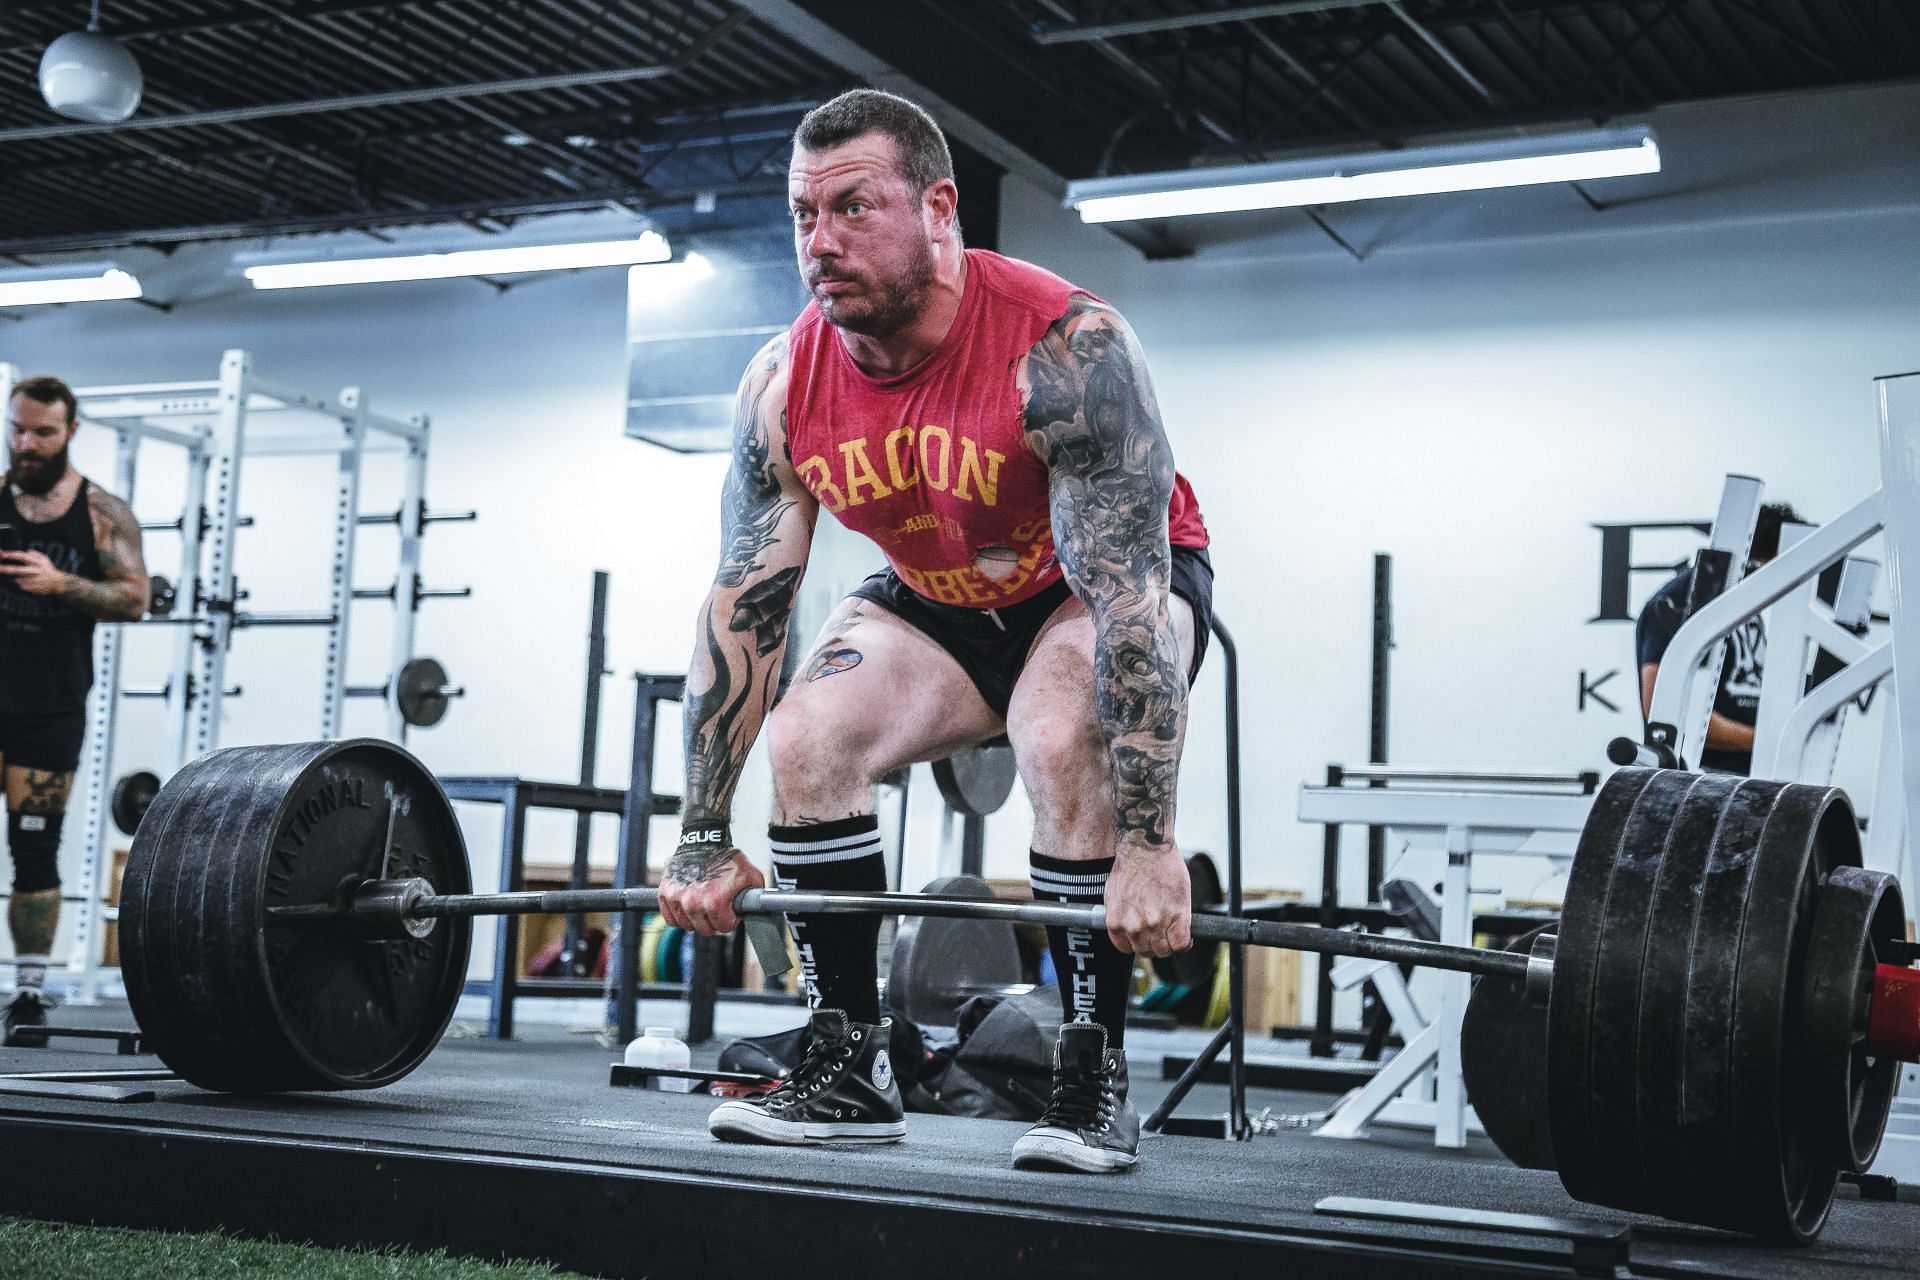 Deadlifts involve raising dead weight from the ground, which is pretty well implied by the name. (Image via Unsplash/ Alora Griffiths)